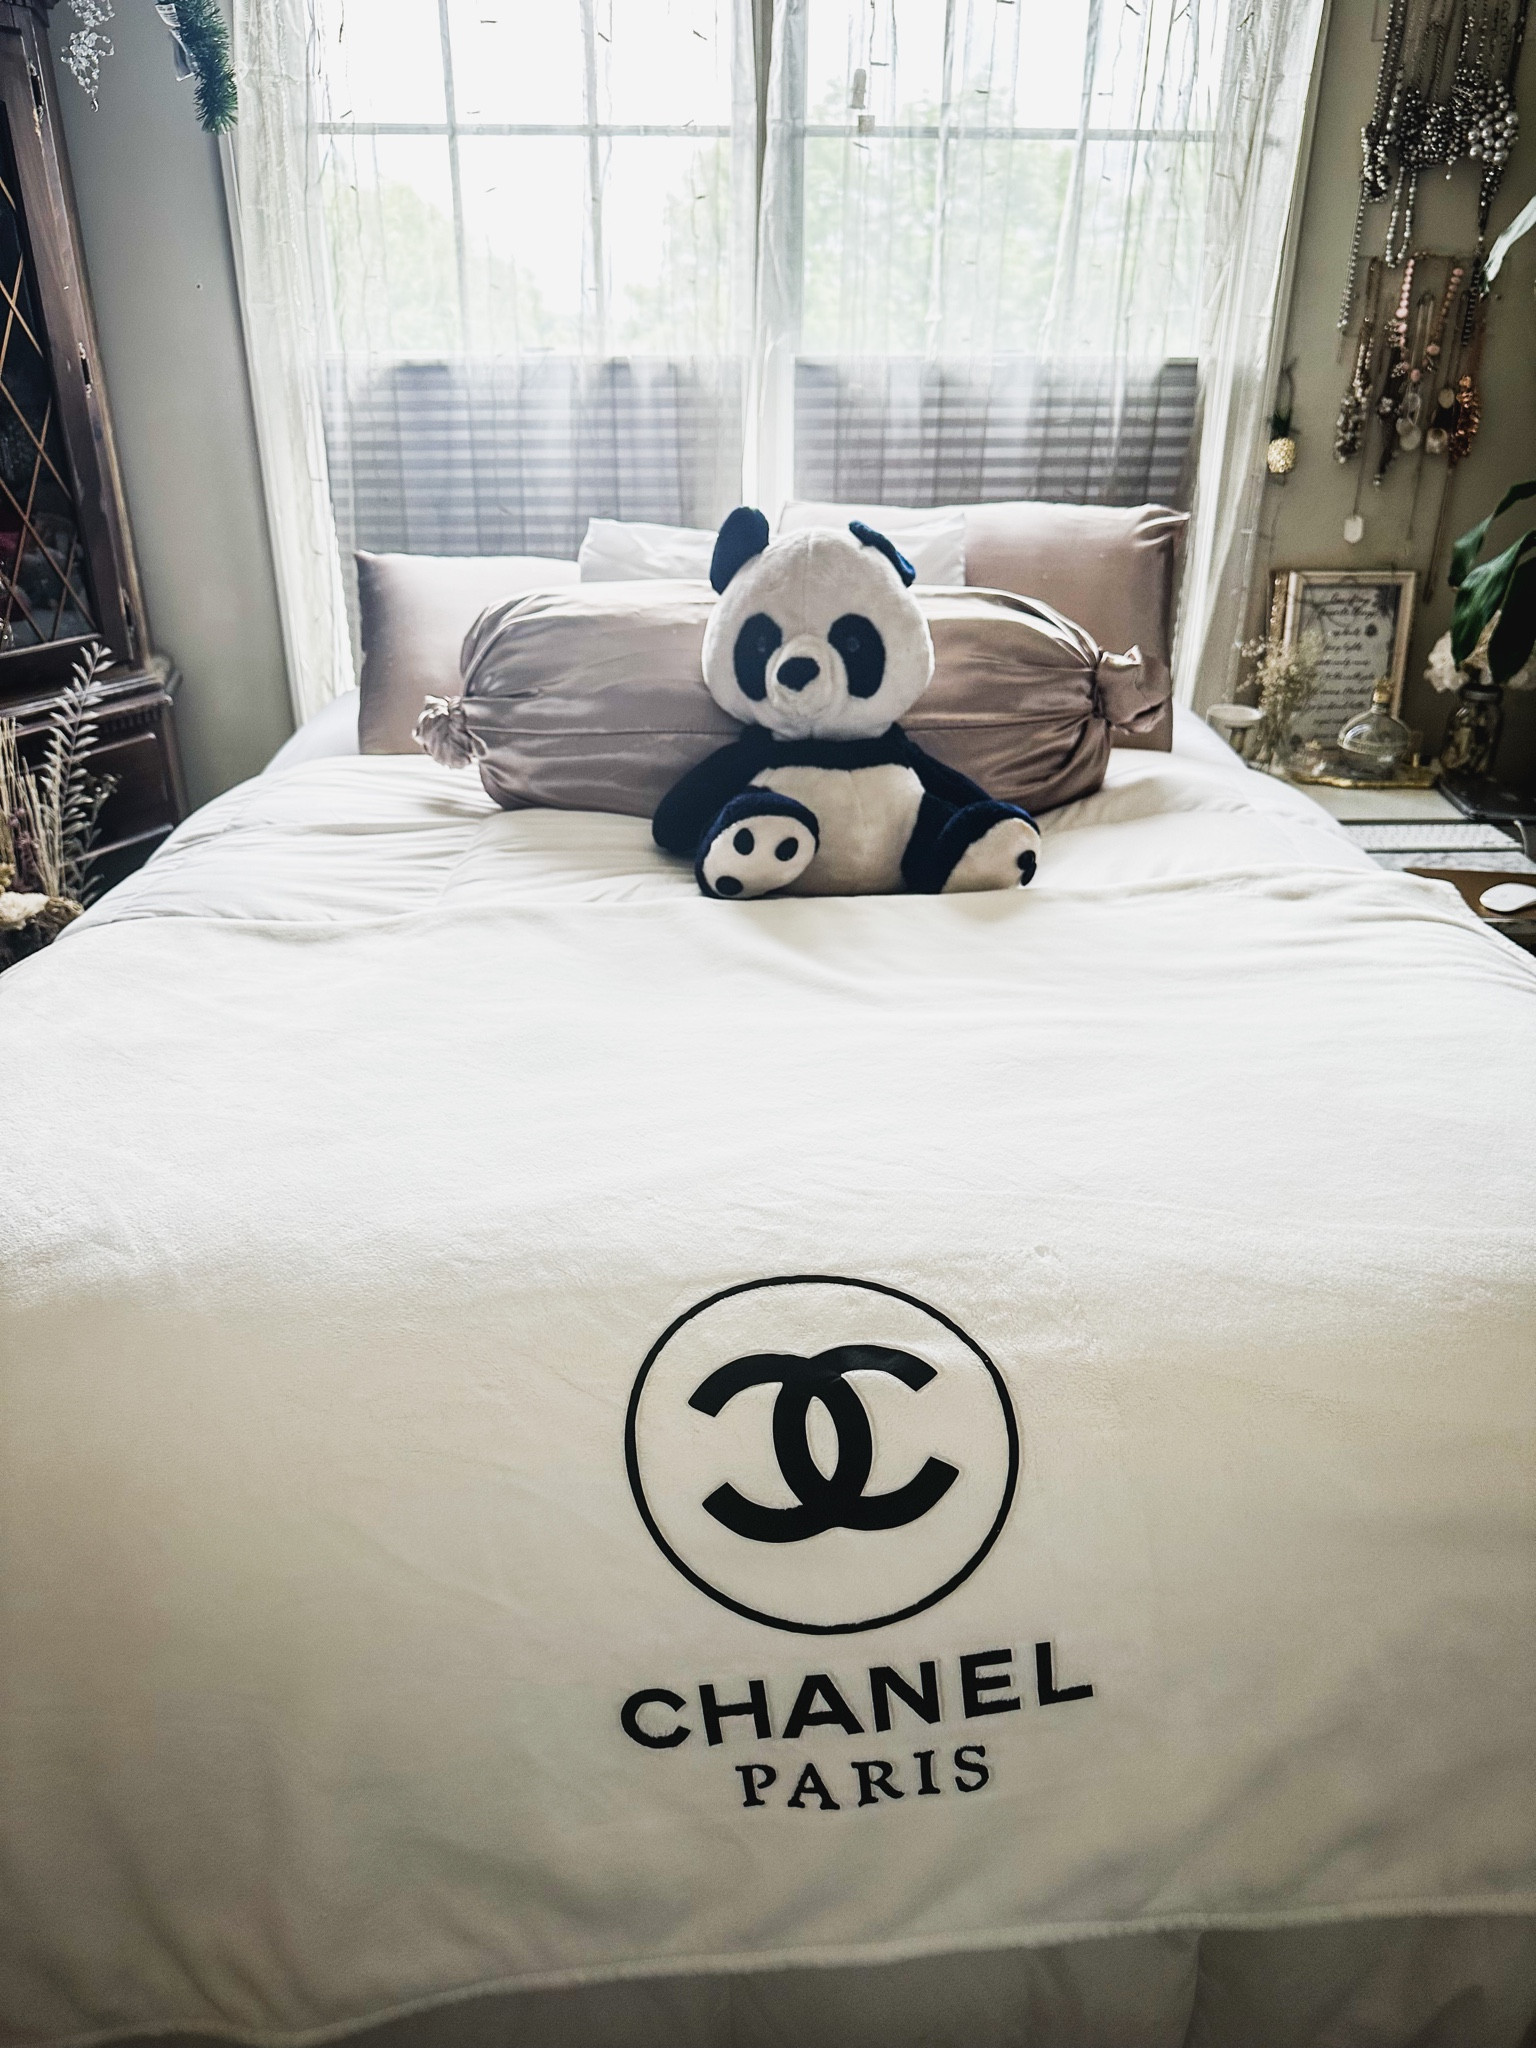 I will sleep like a baby with Beckham Hotel Collection comforter